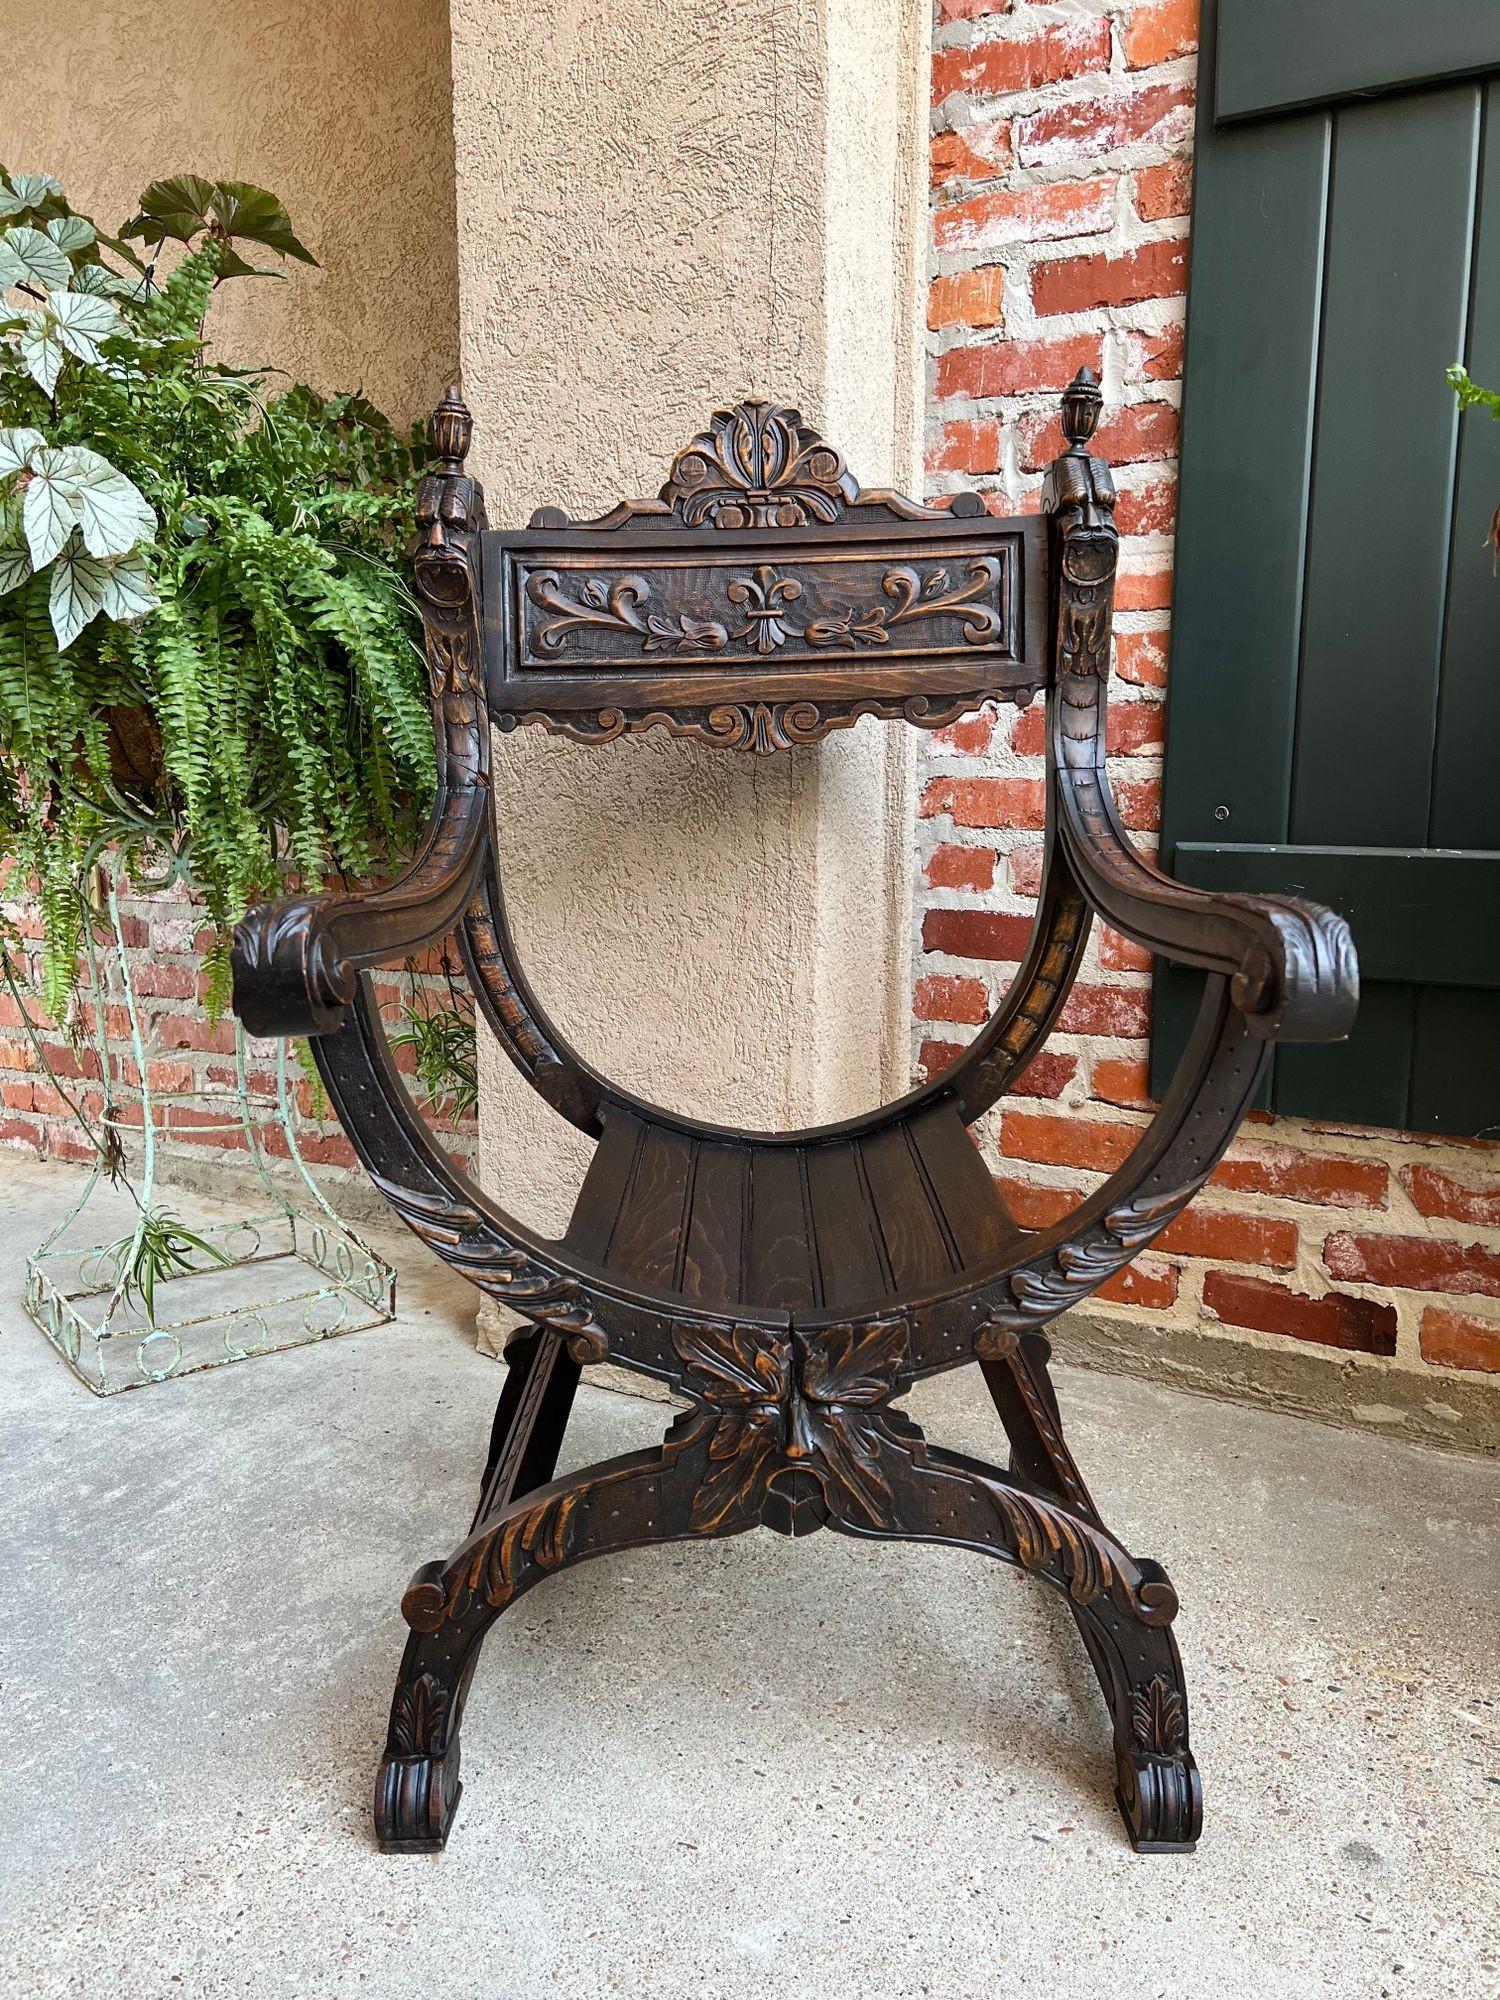 French Provincial 19th Century French Dagobert Arm Chair Carved Oak Curule Throne Renaissance